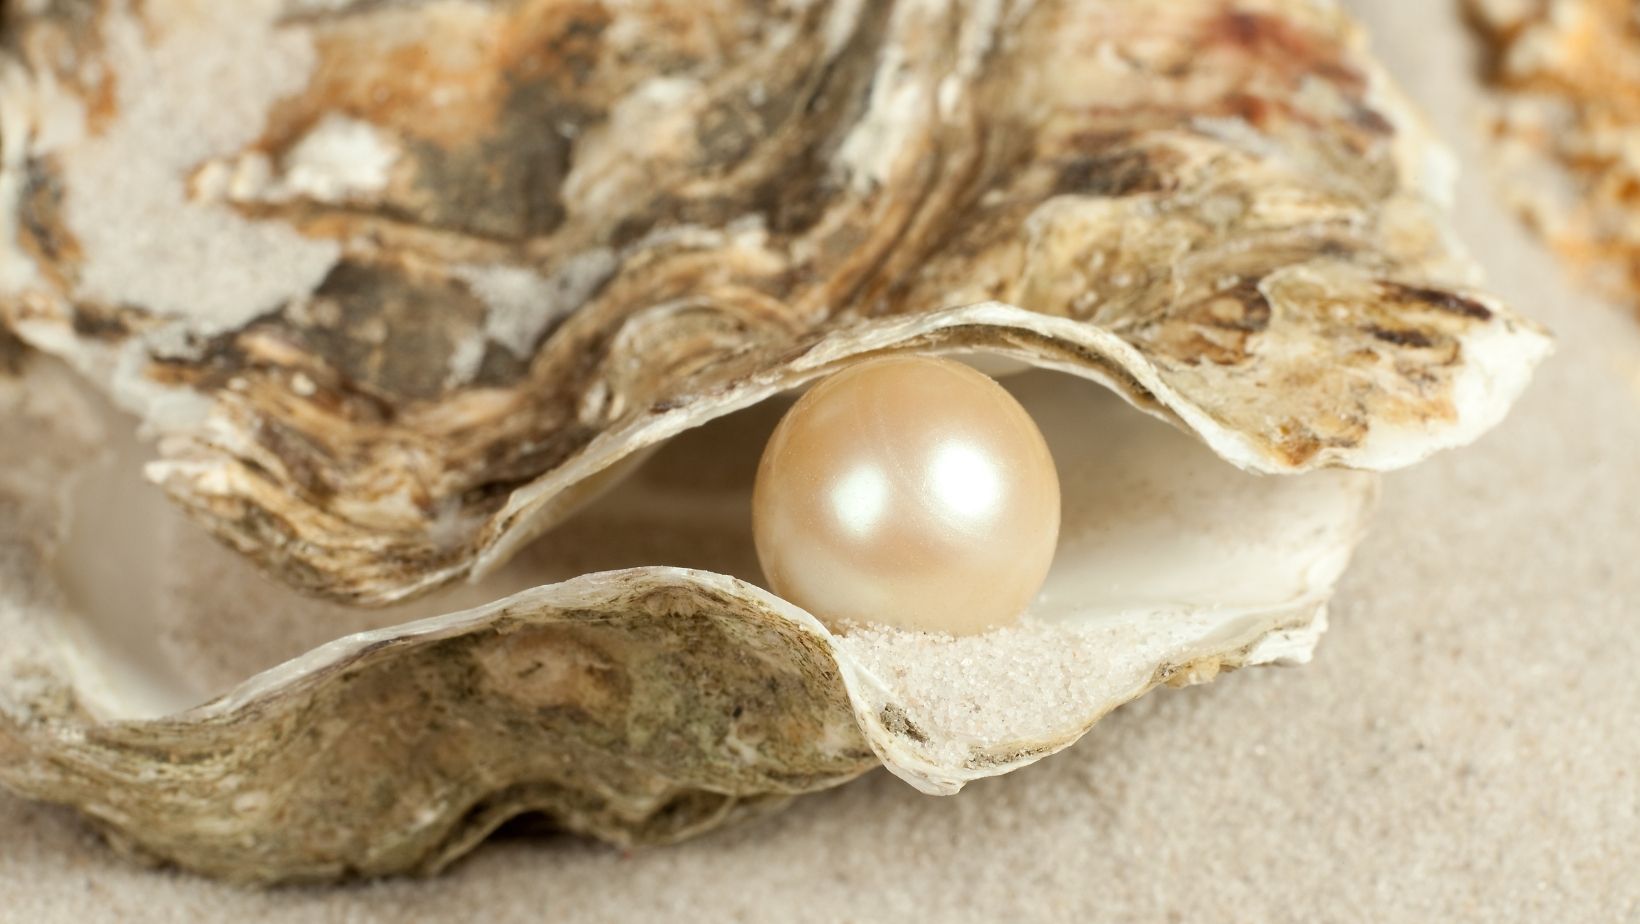 How are pearls formed